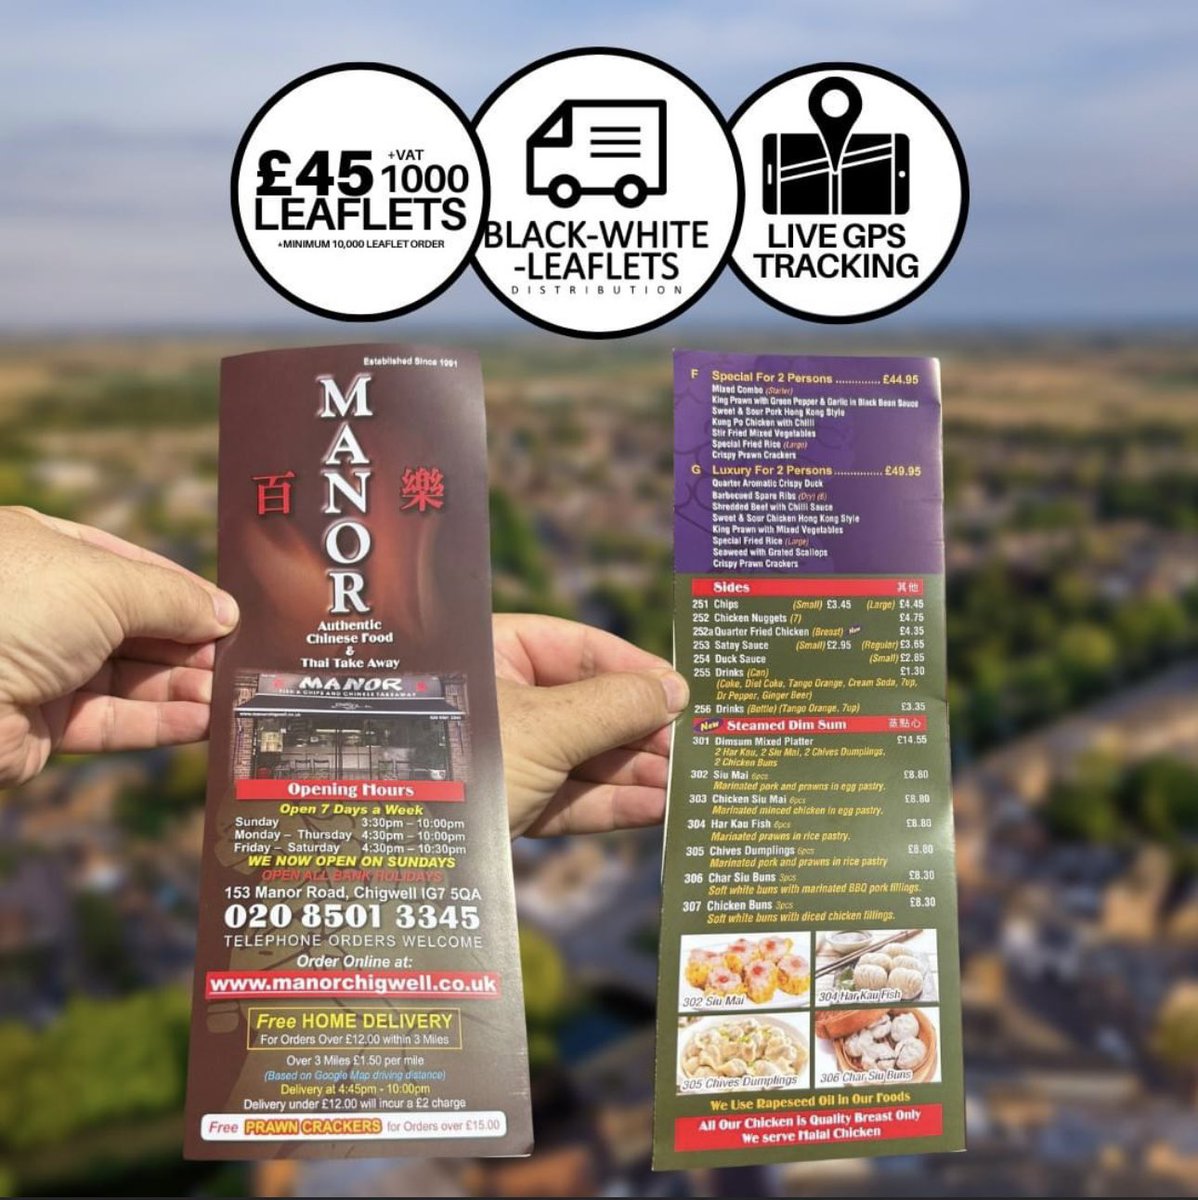 Delivering for Manor Takeaway. If you are local to the area check them out if you fancy a treat manorchigwell.co.uk 😋

For more information on how we can help your business grow please visit black-white-leaflets-distribution.com

#leafletdistribution #londonleaflets #chinesetakeaway